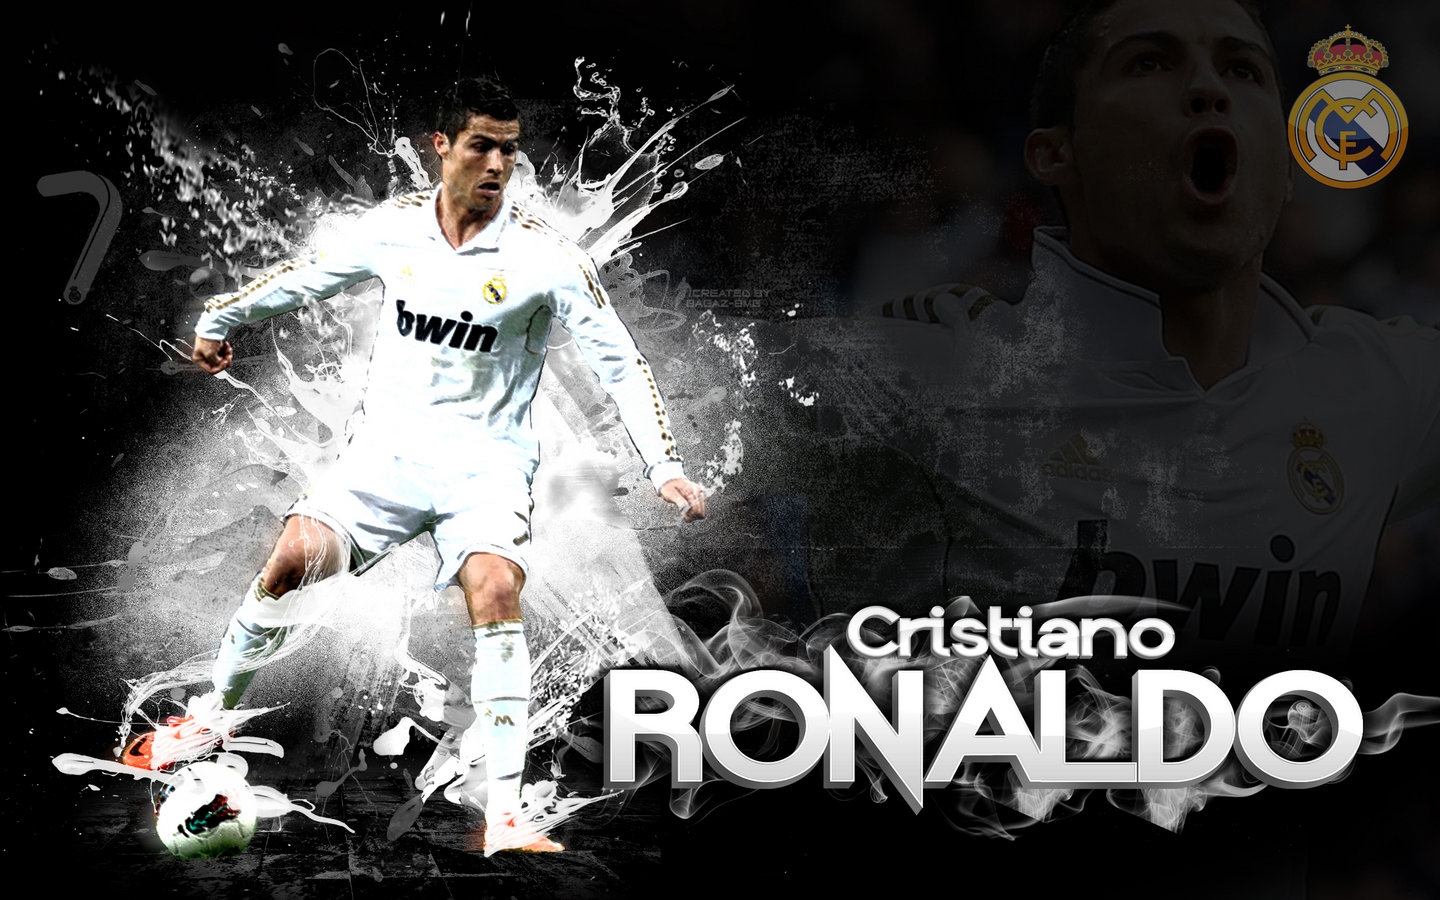 Ronaldo Abstract Picture Celebrating After Goal Cristiano